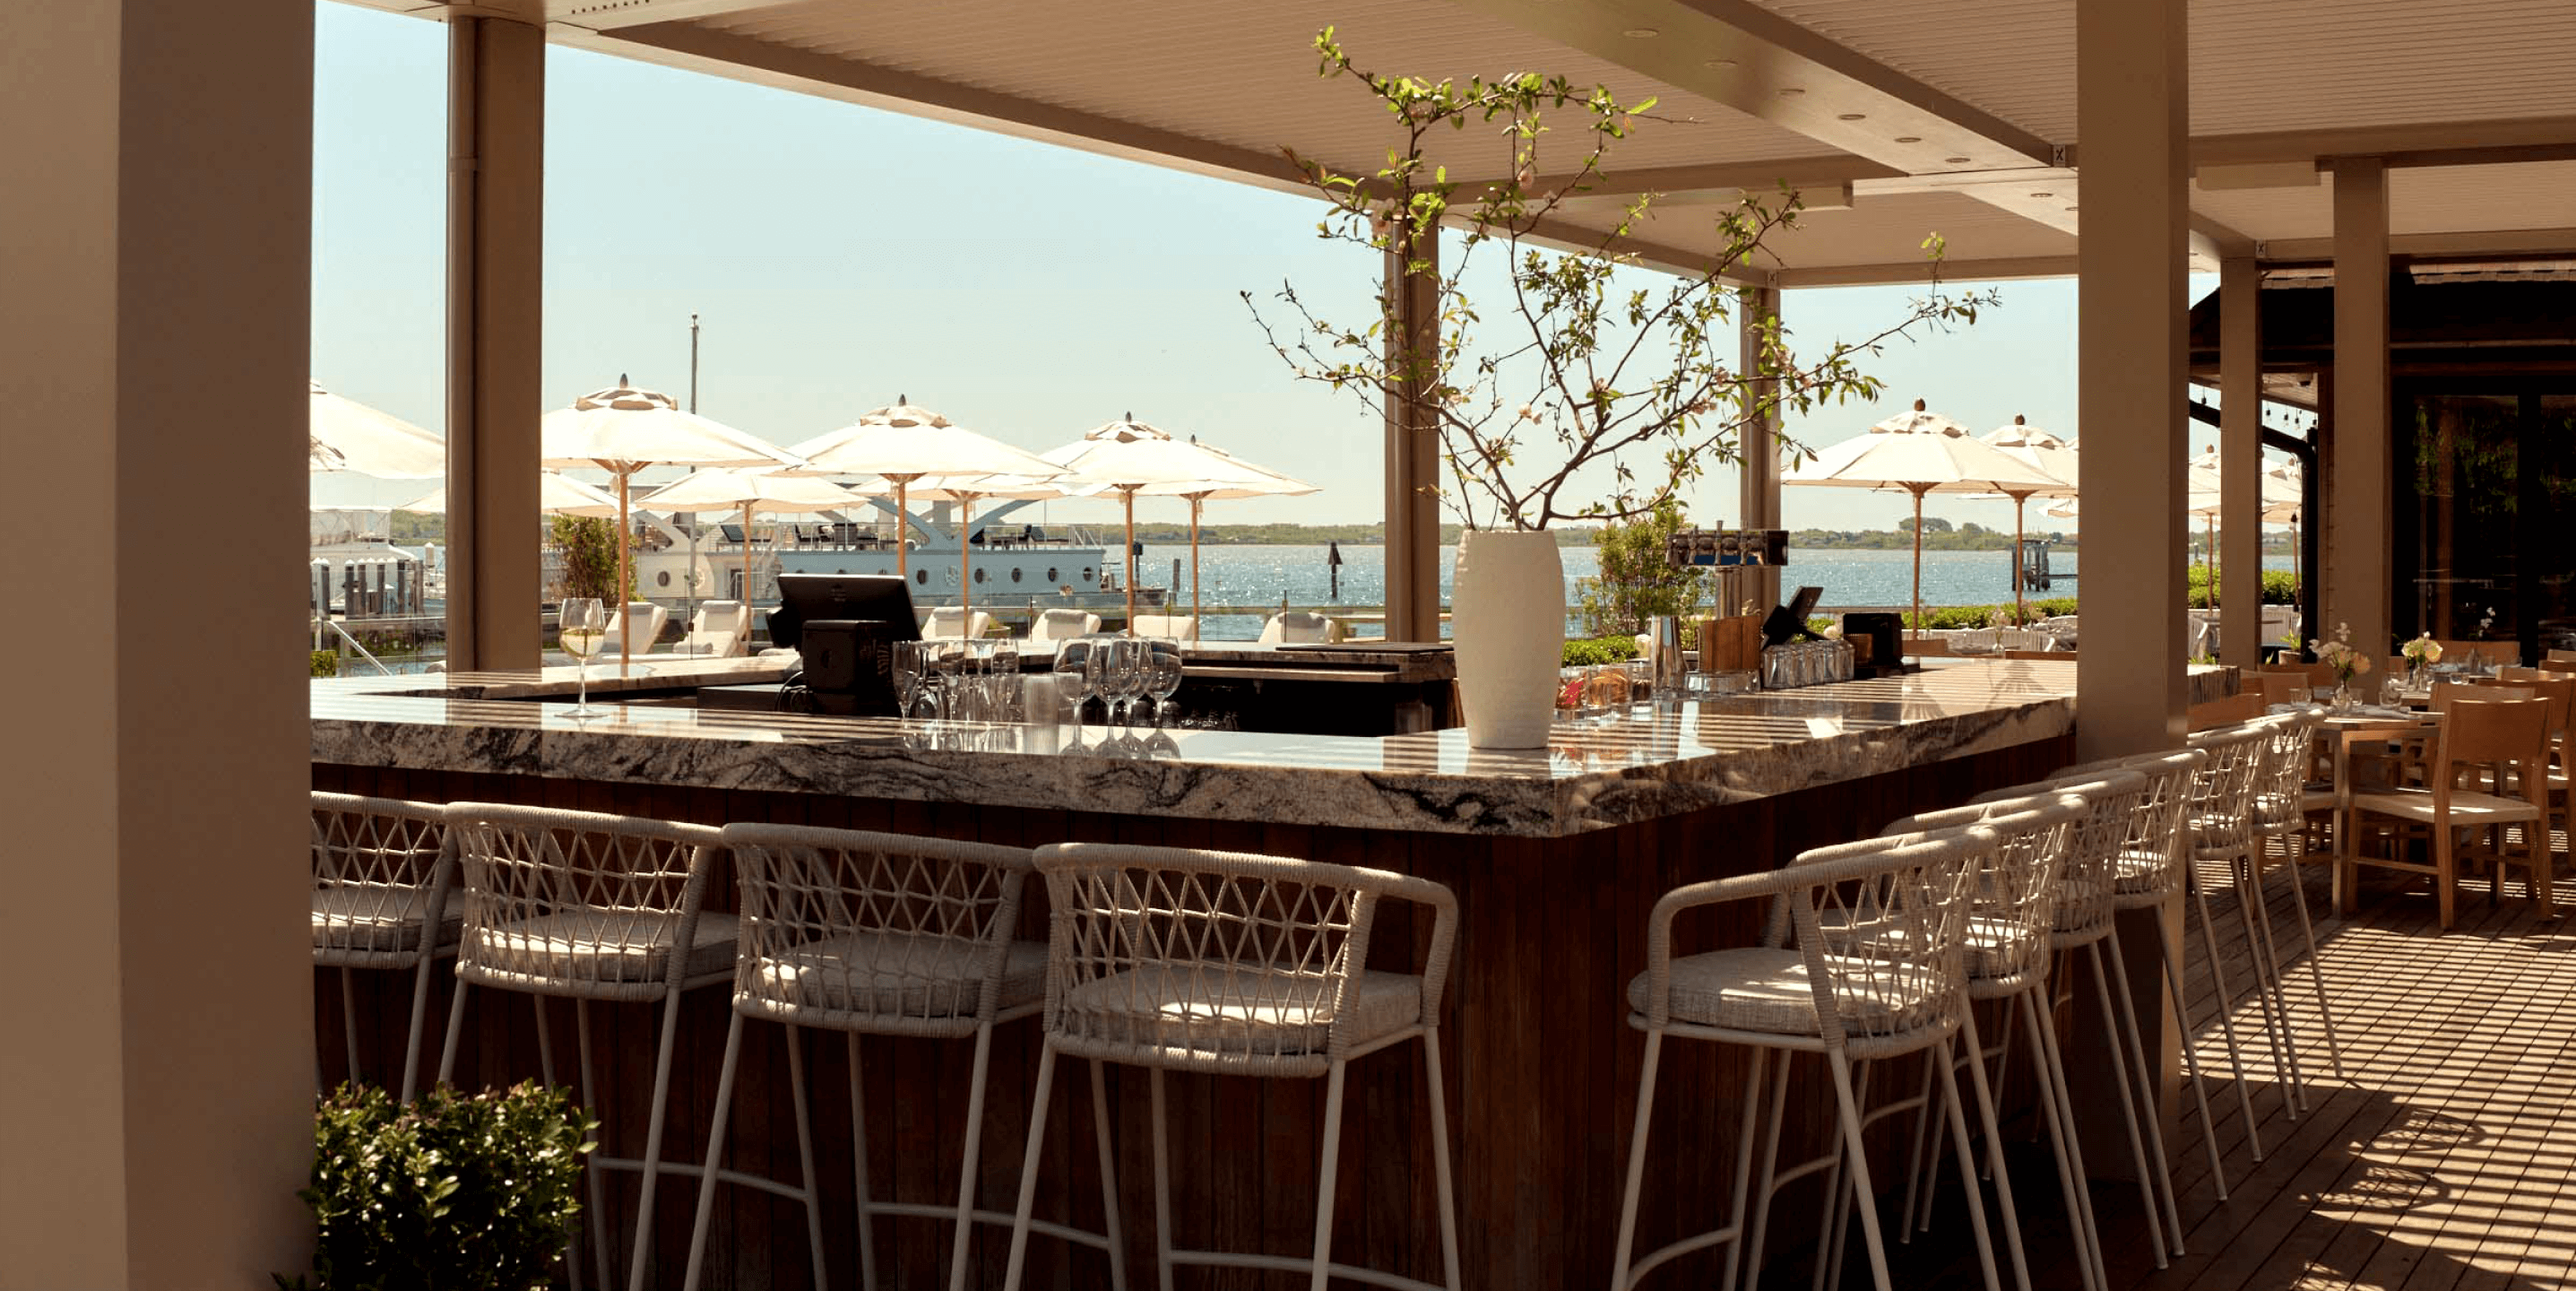 Chairs beside the bar counter provide a stunning sea view from their position.